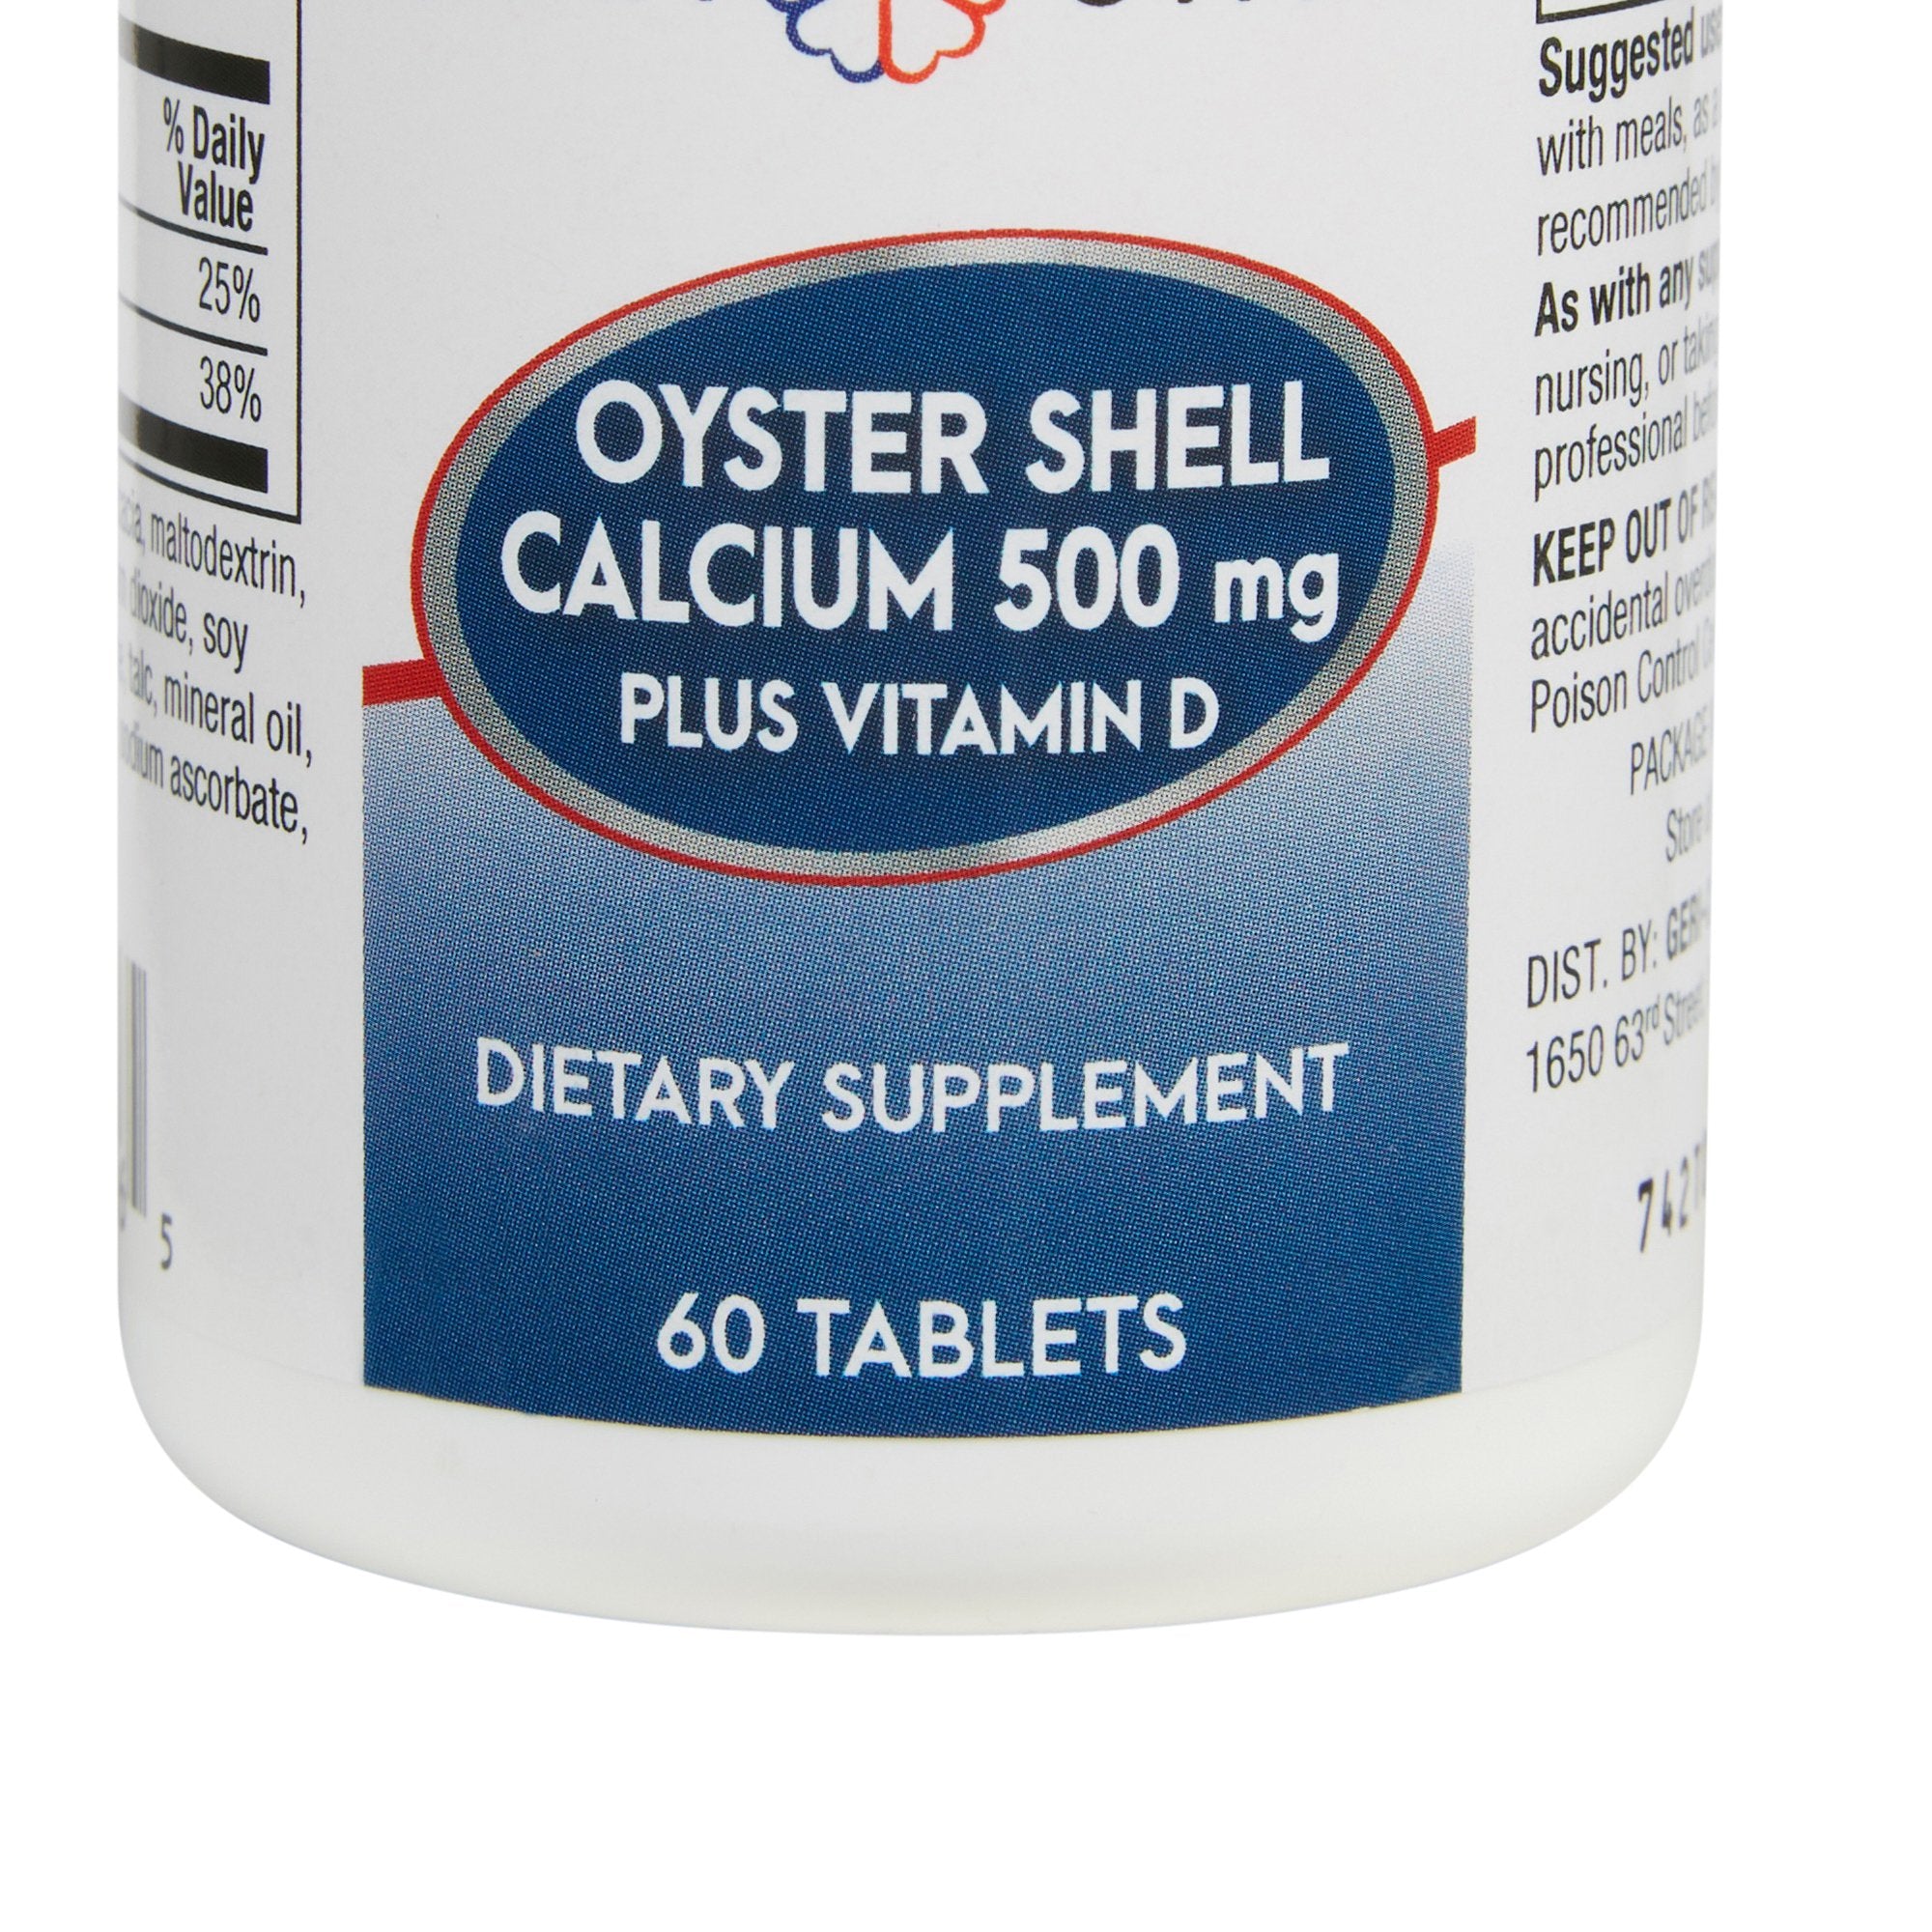 Joint Health Supplement Geri-Care Oyster Shell 500 mg Strength Tablet 60 per Bottle